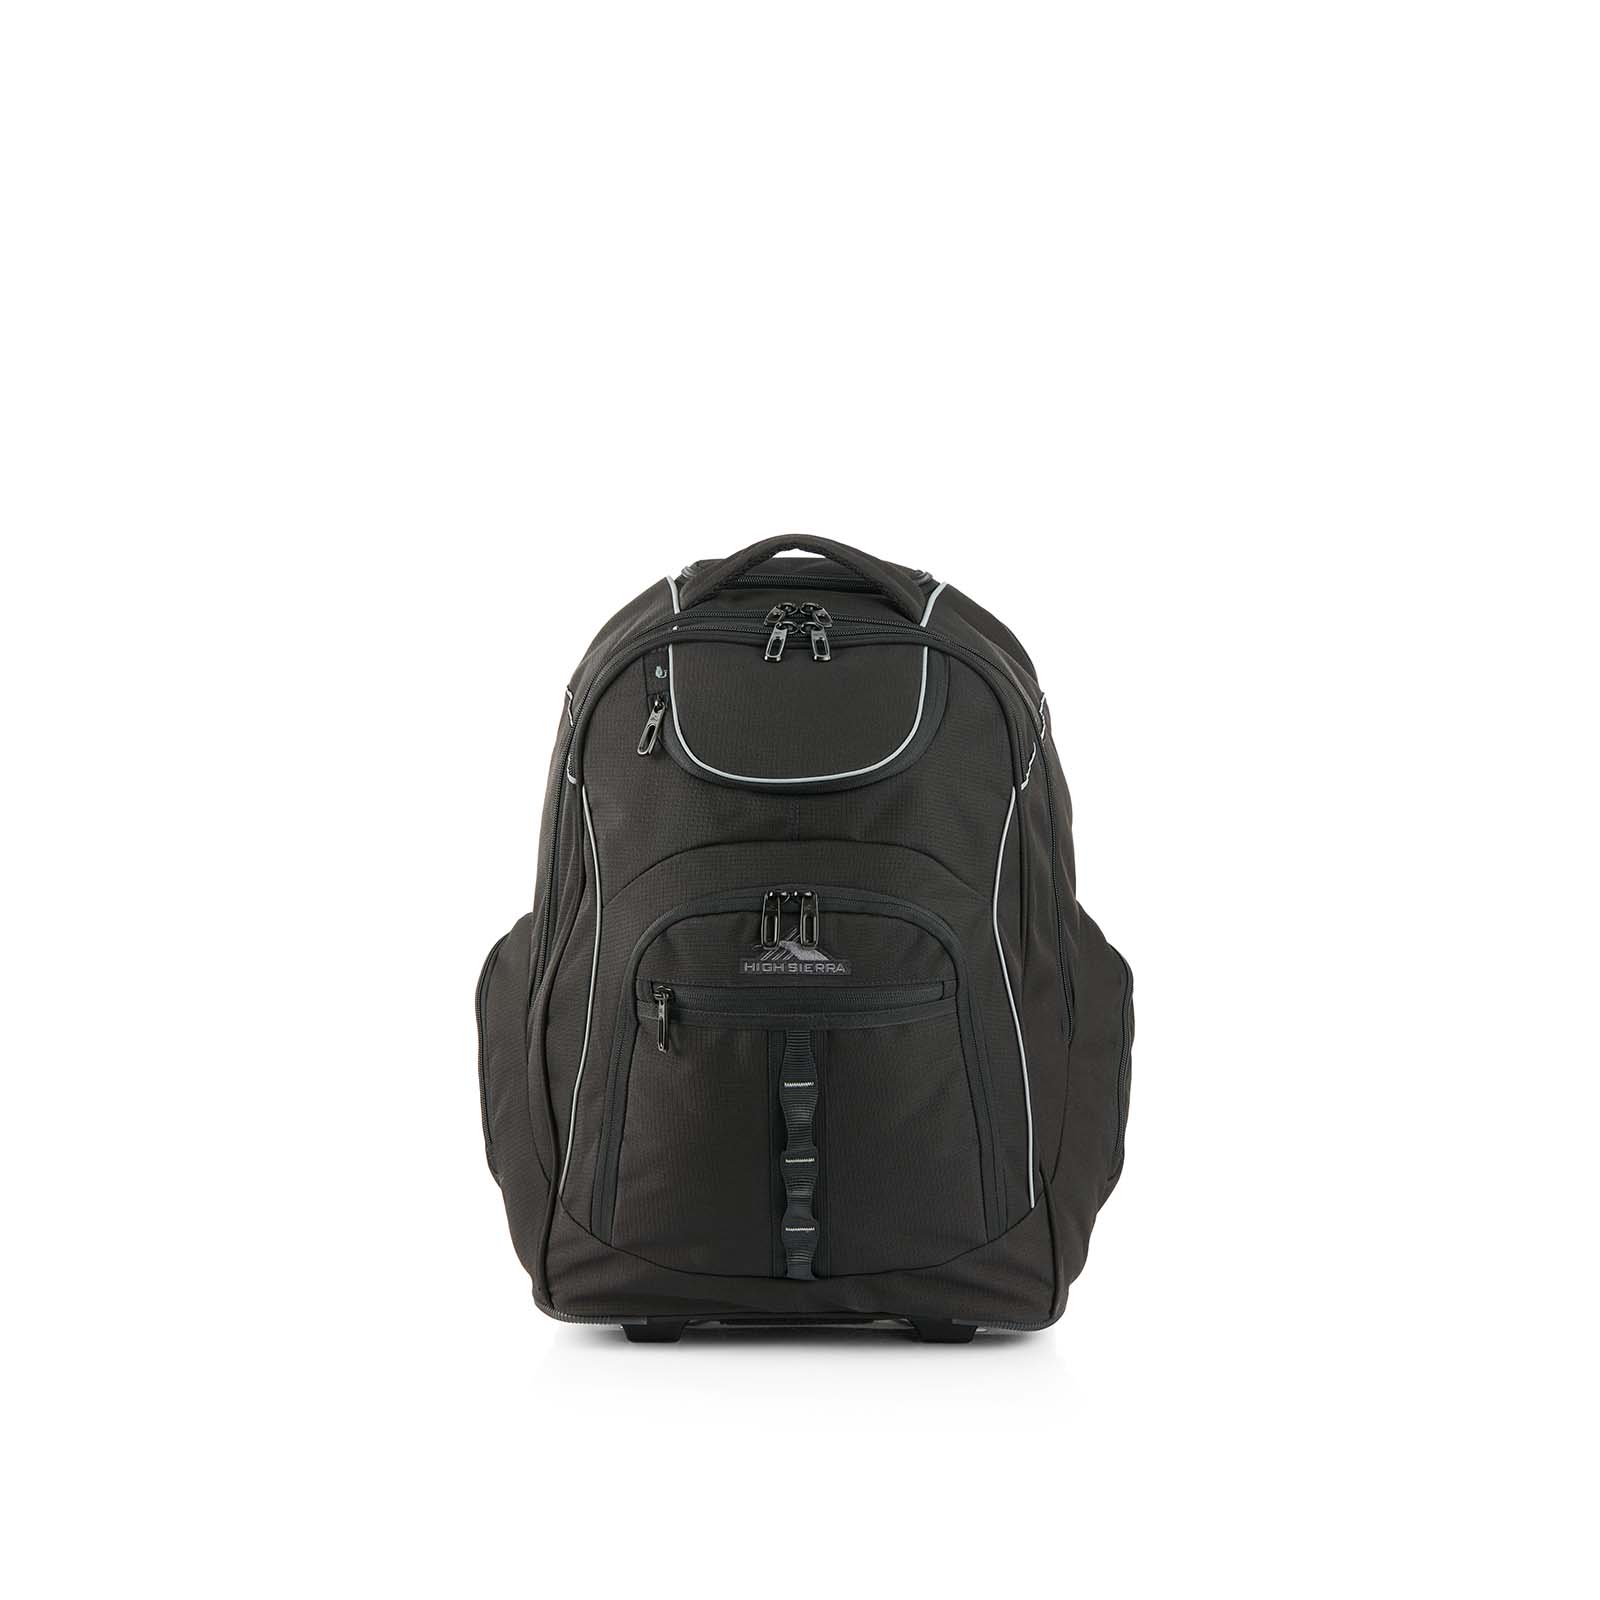 High-Sierra-Access-3-Eco-Pro-16-Inch-Wheeled-Laptop-Backpack-Black-Front